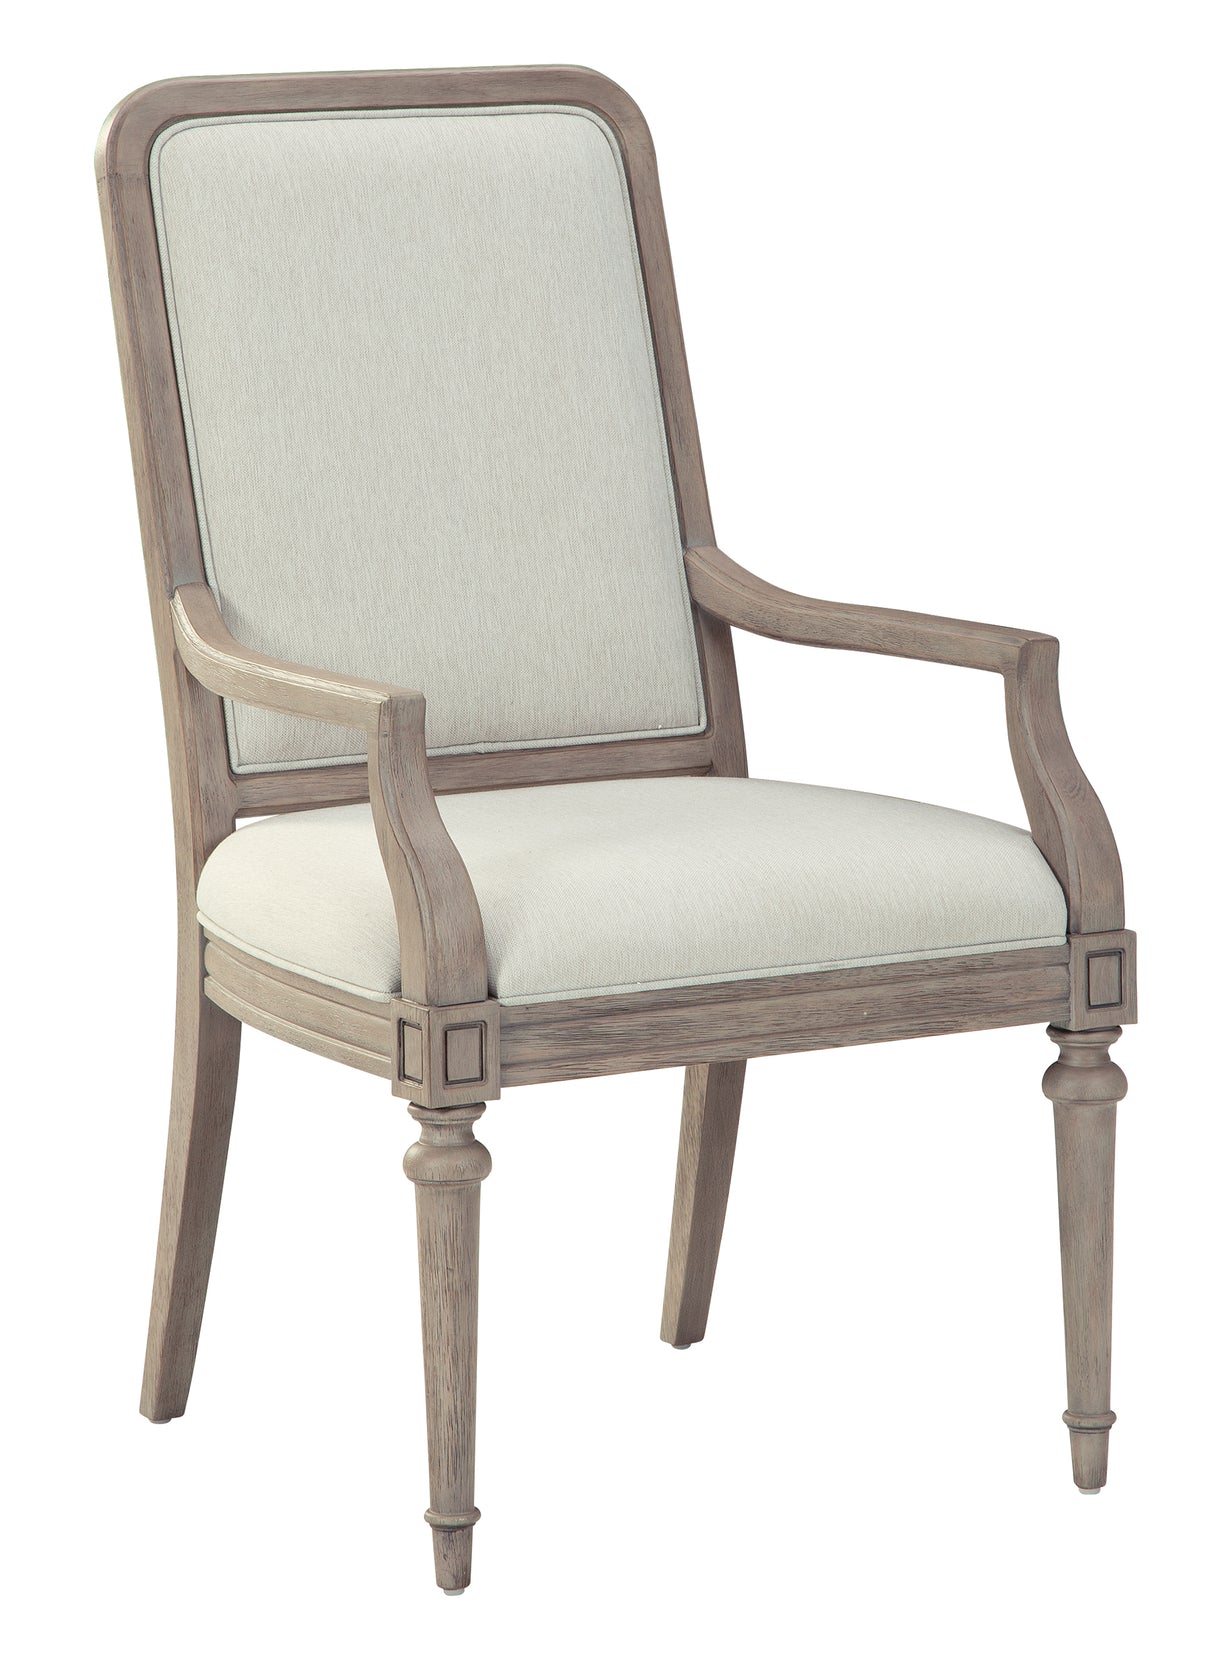 Hekman 25224 Wellington Estates 23.5in. x 25.75in. x 42in. Upholstered Dining Arm Chair